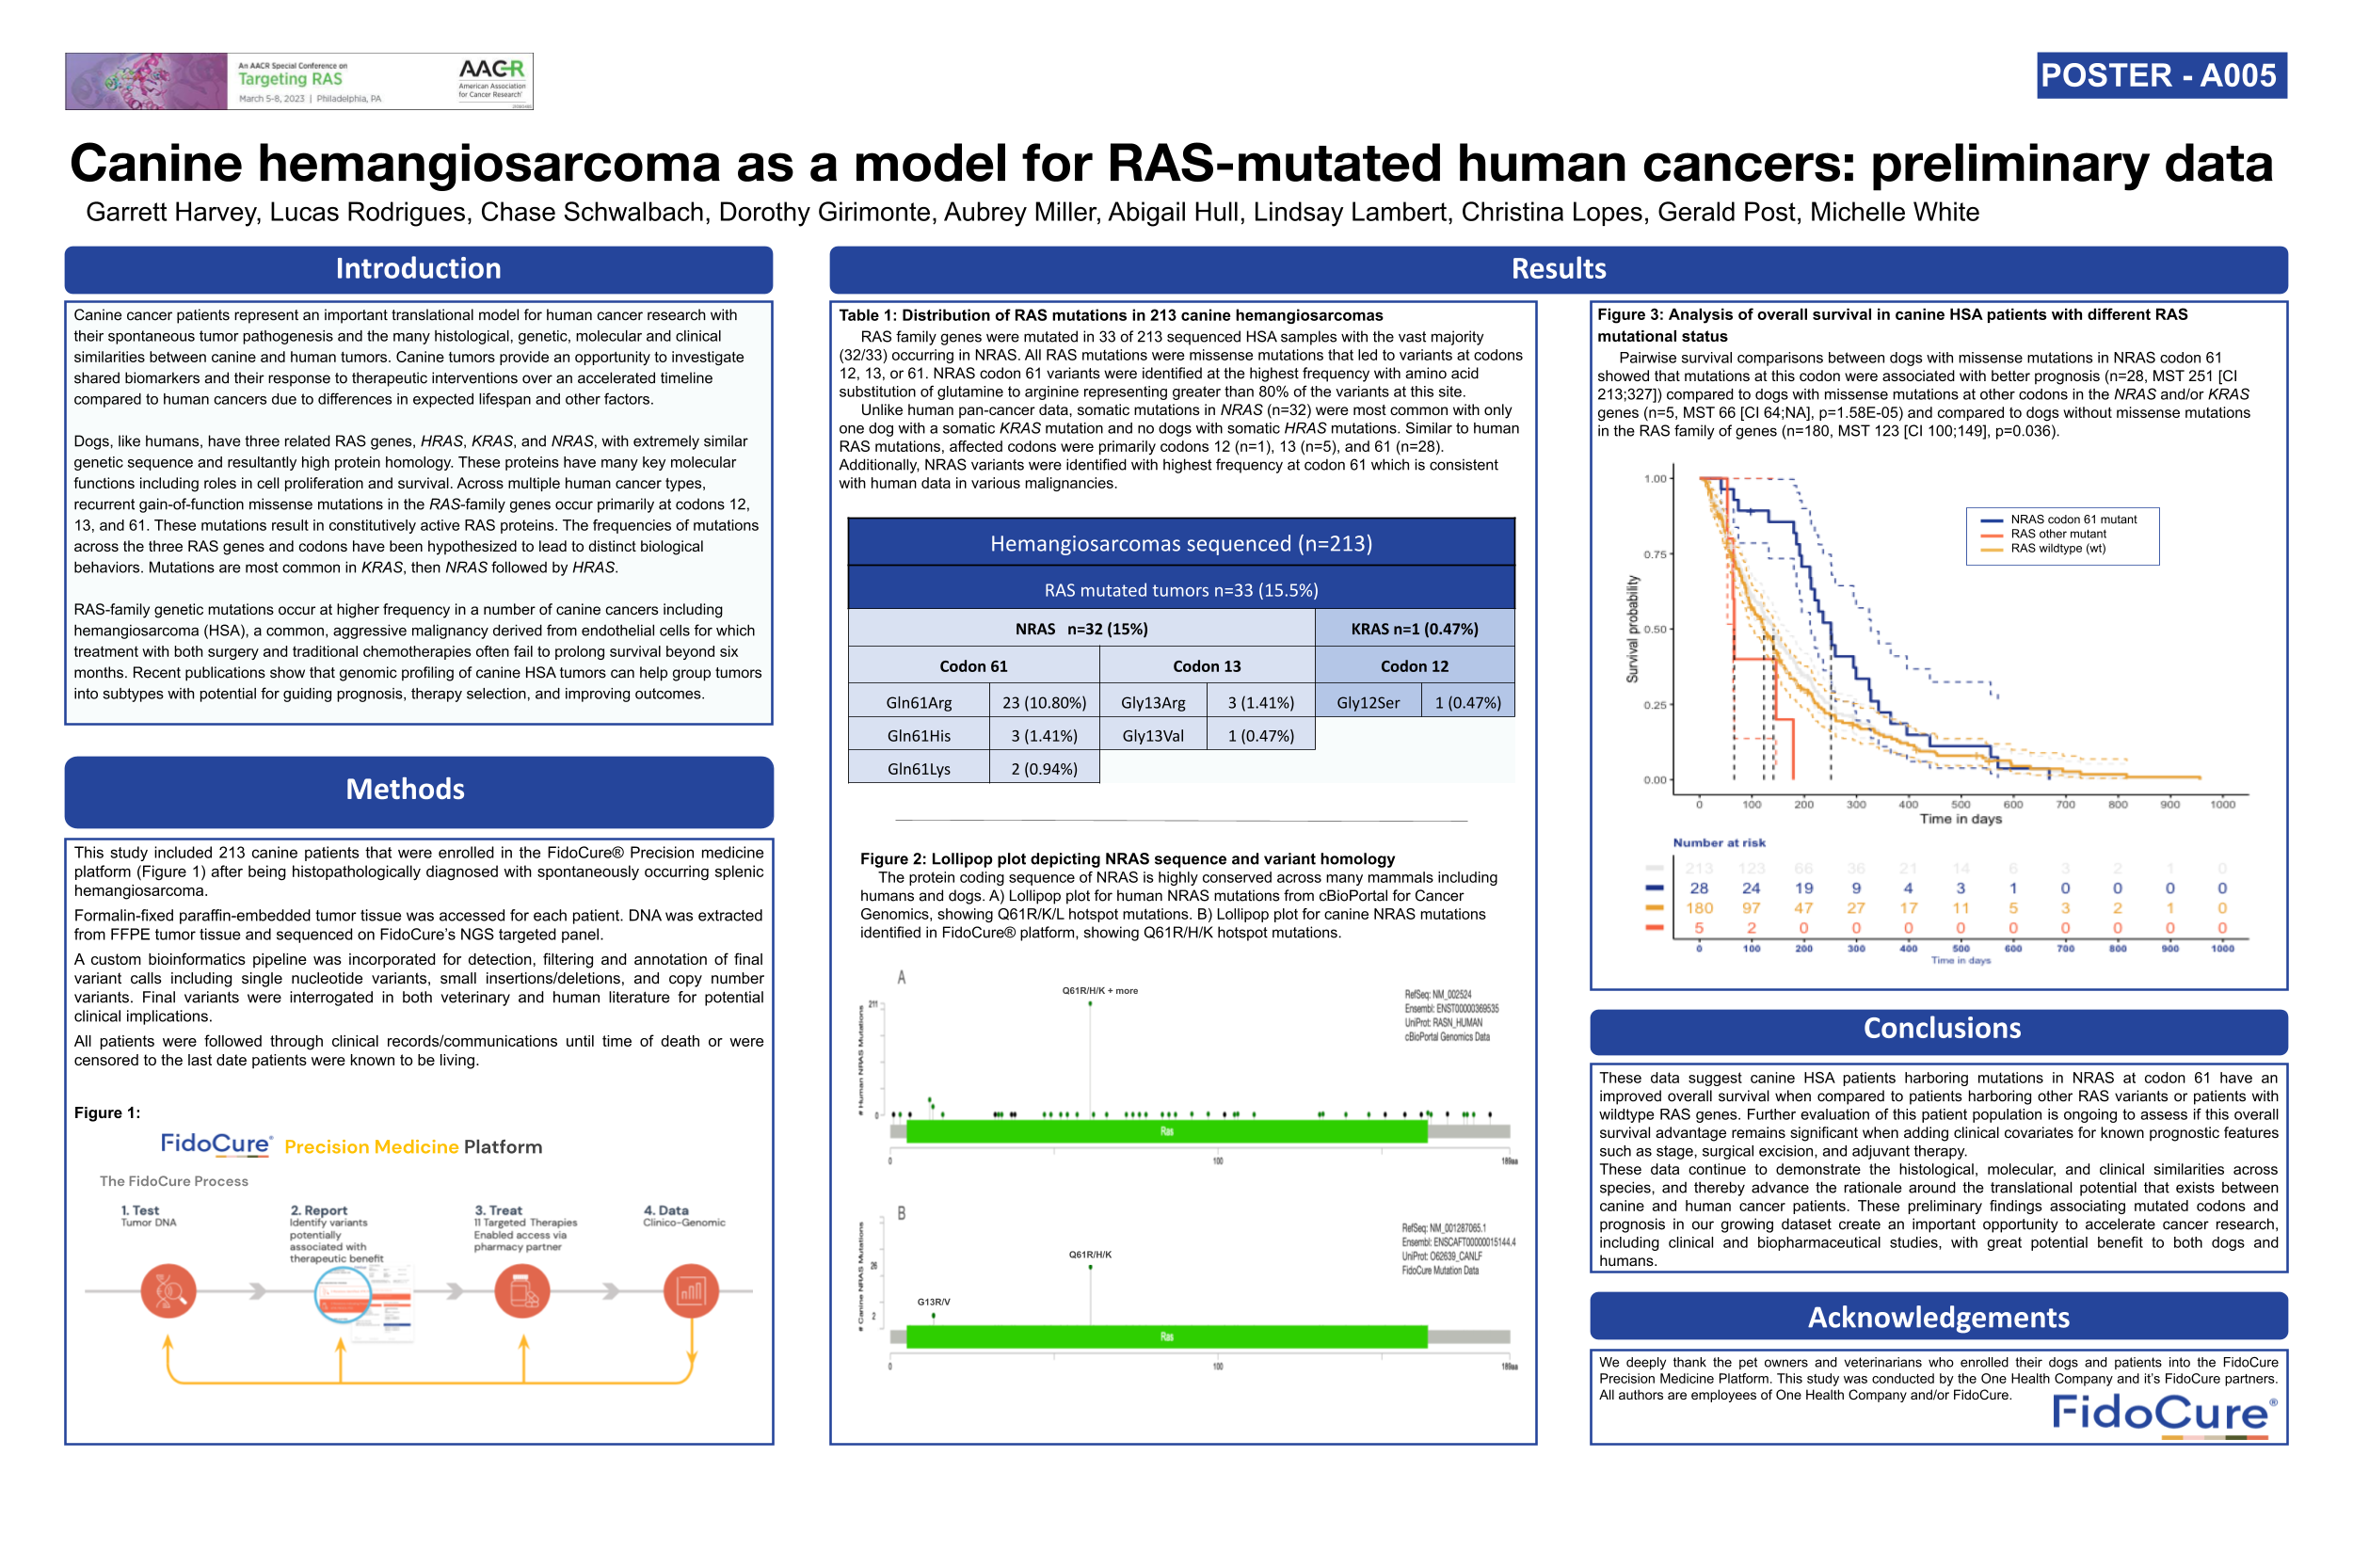 AACR_ Targeting RAS - NRAS Canine HSA.pptx